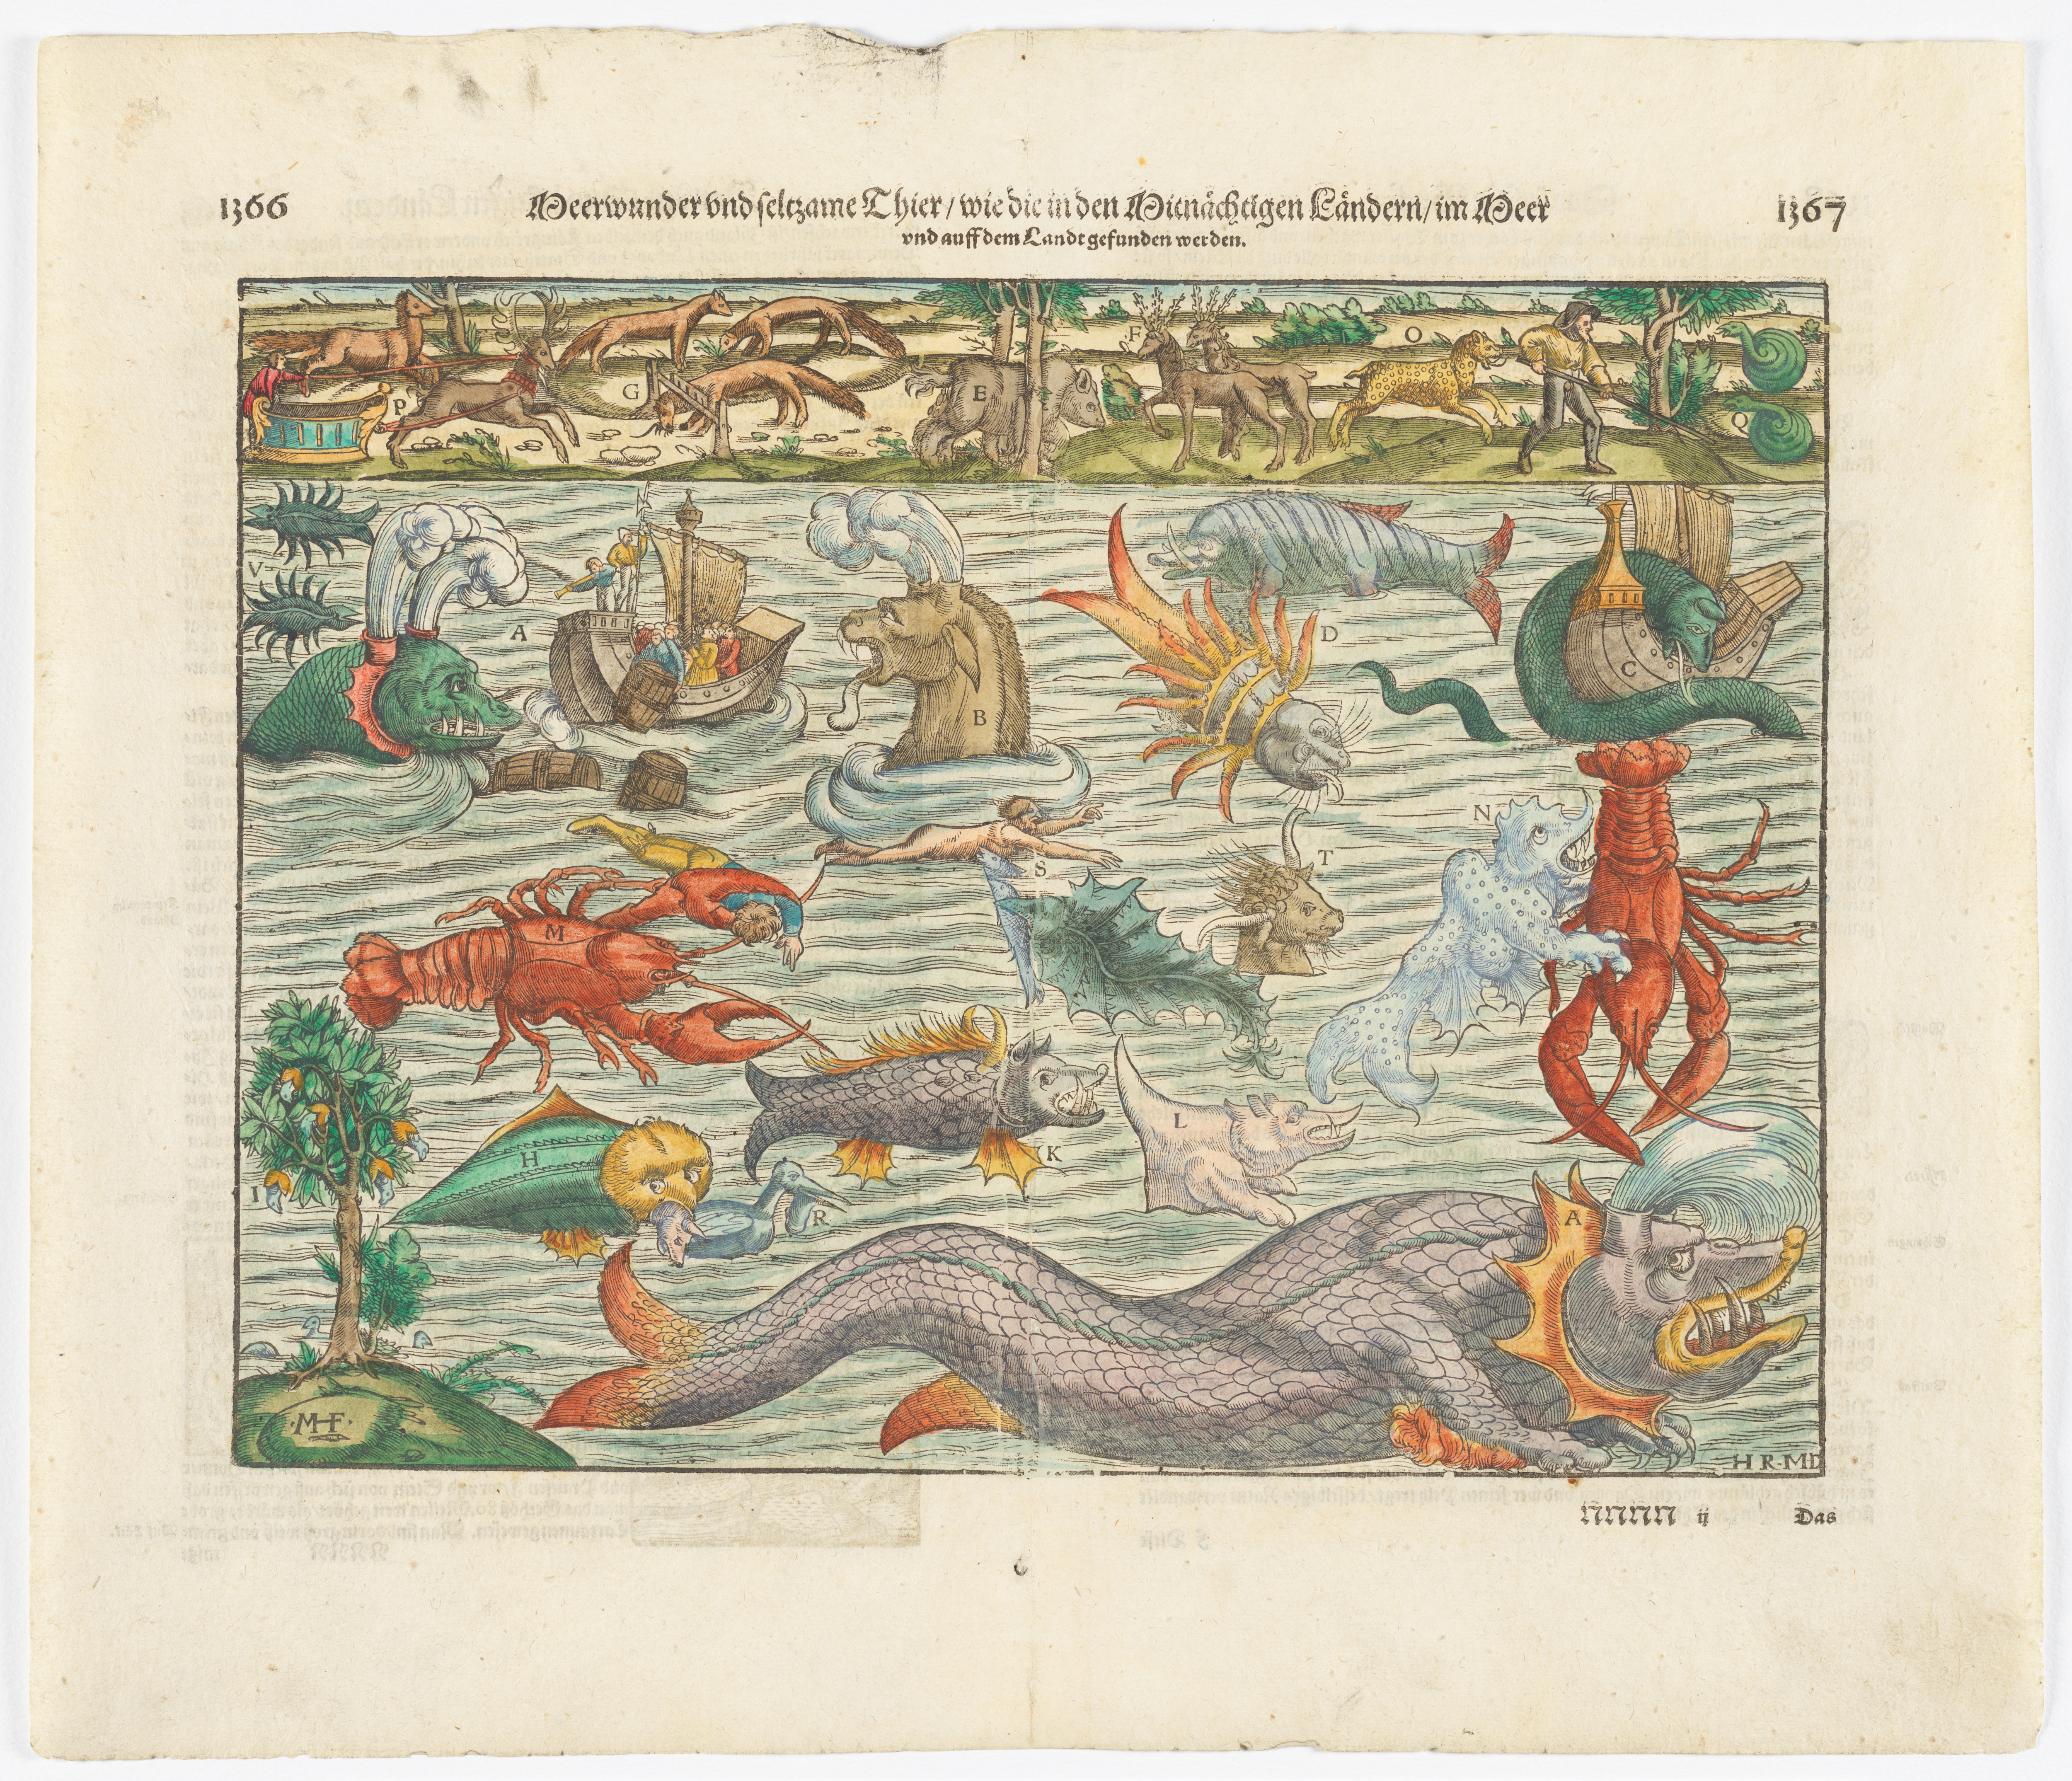 A hand-coloured woodcut depicting sea monsters in the ocean.